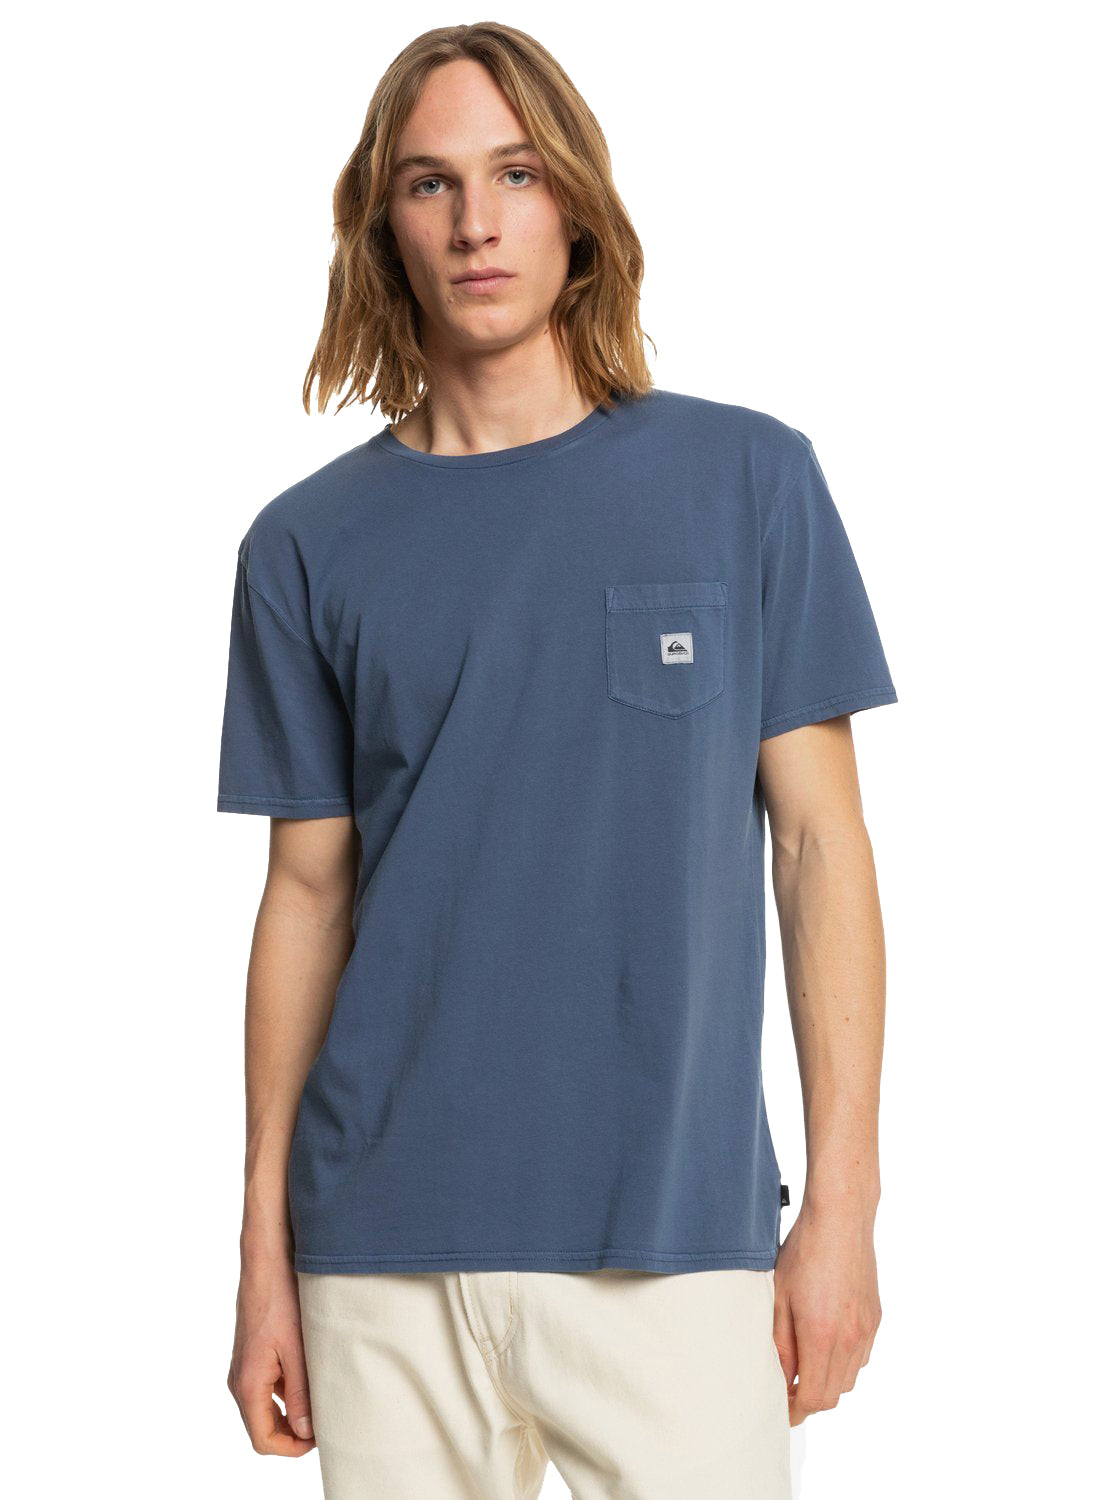 Quiksilver Sub Missions SS Tee BPY0 M